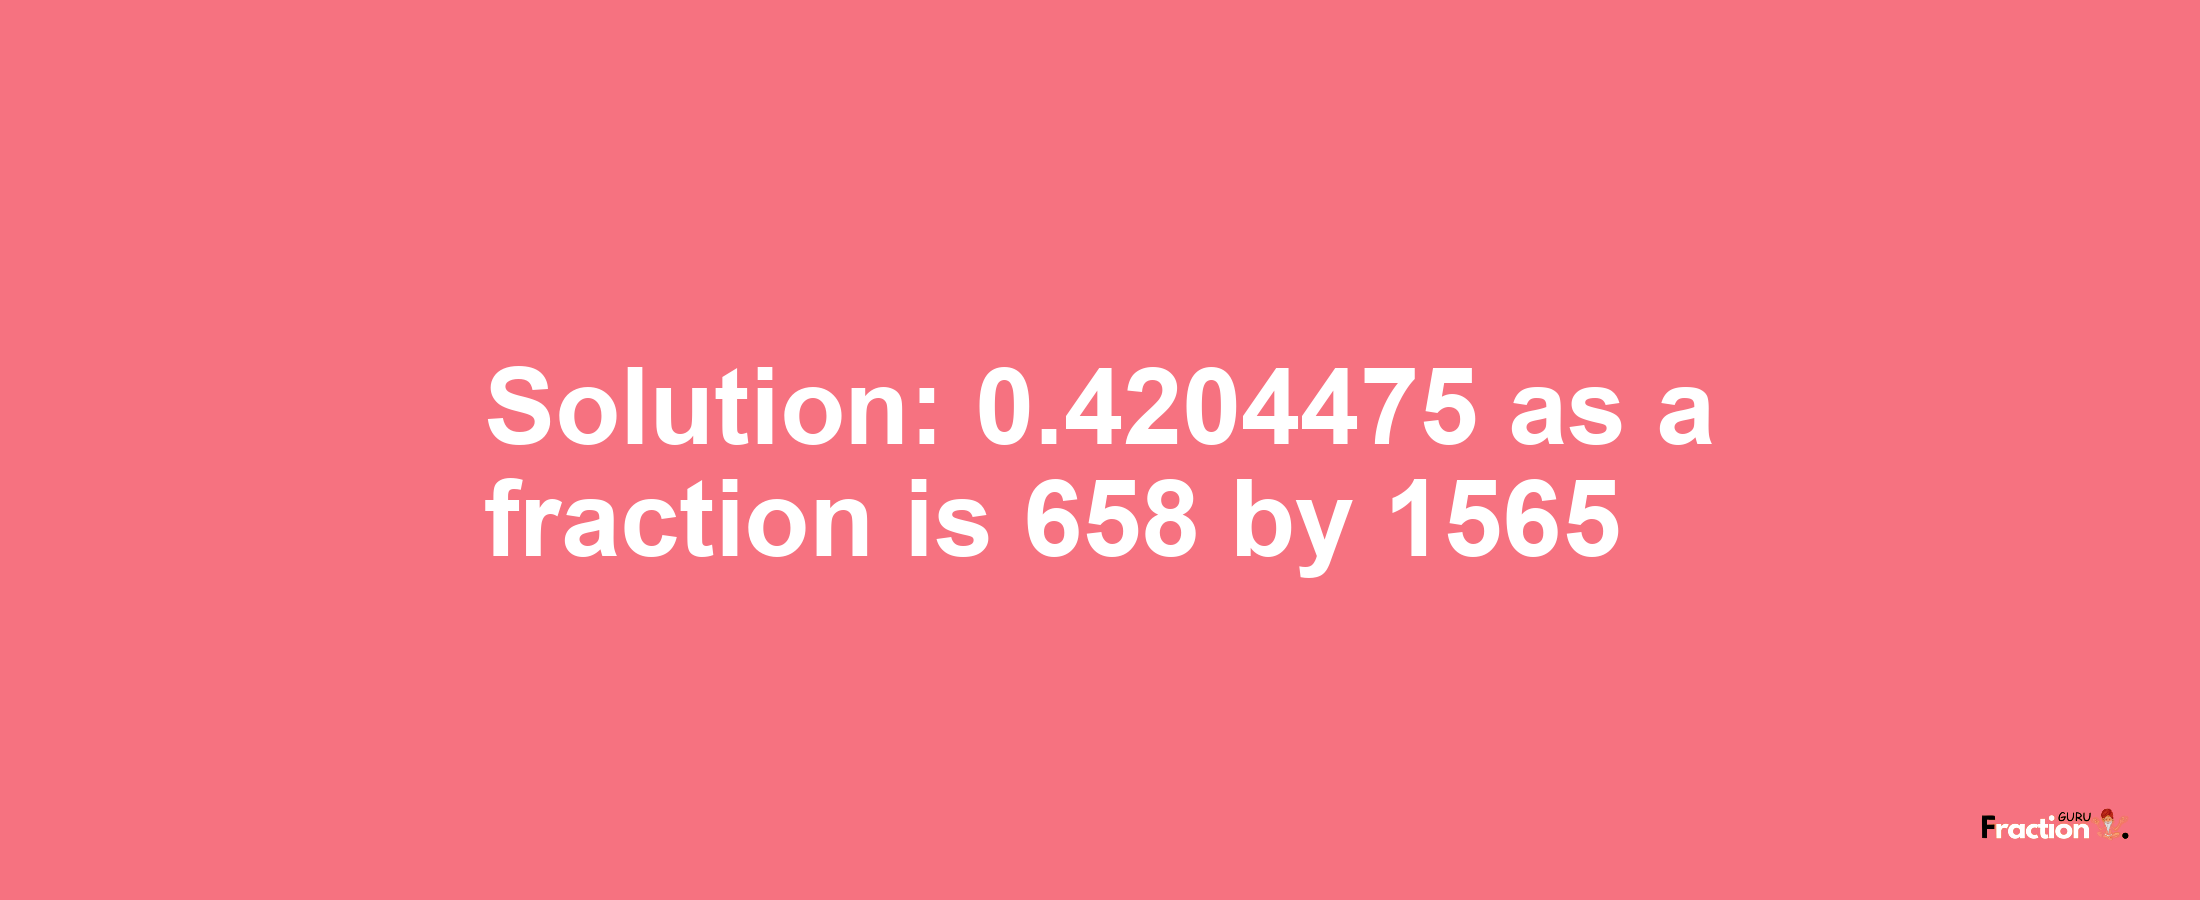 Solution:0.4204475 as a fraction is 658/1565